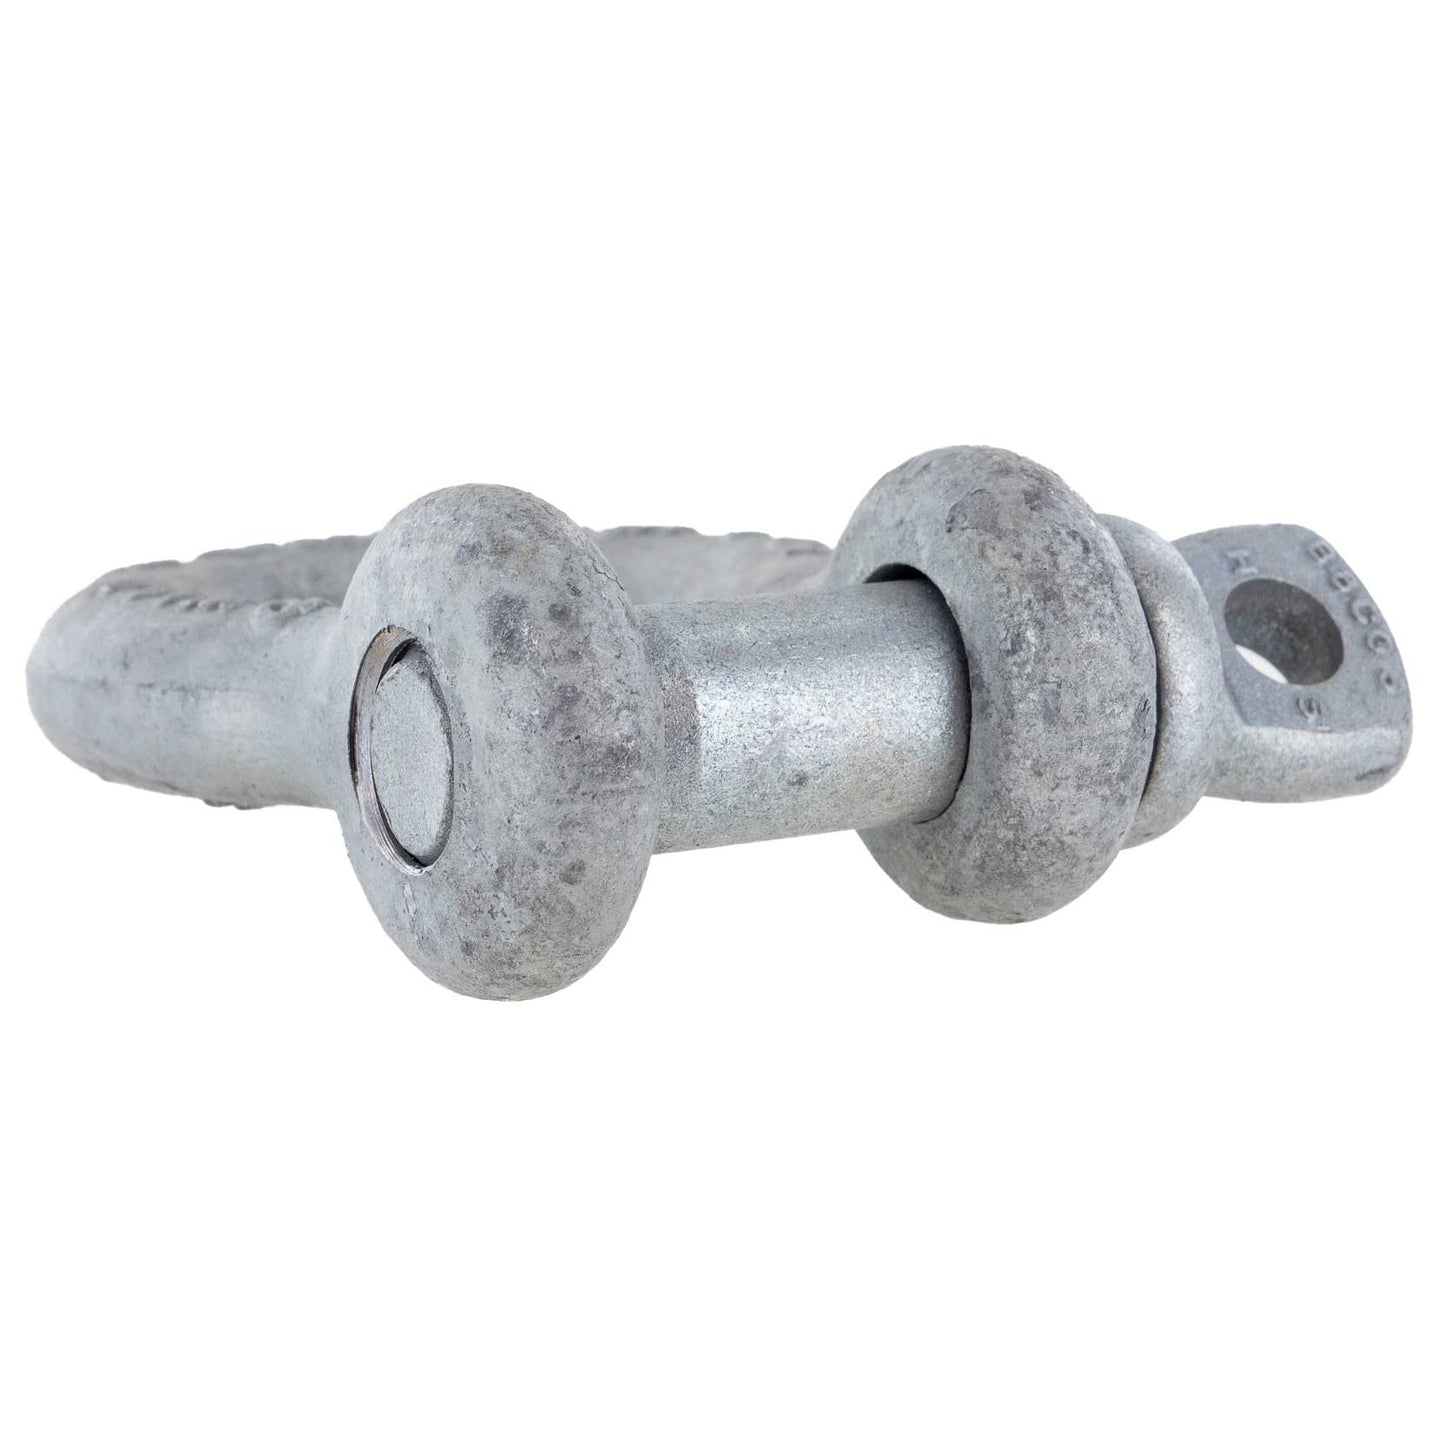 1-1/4" Crosby® Alloy Screw Pin Anchor Shackle | G-209A - 18 Ton side view